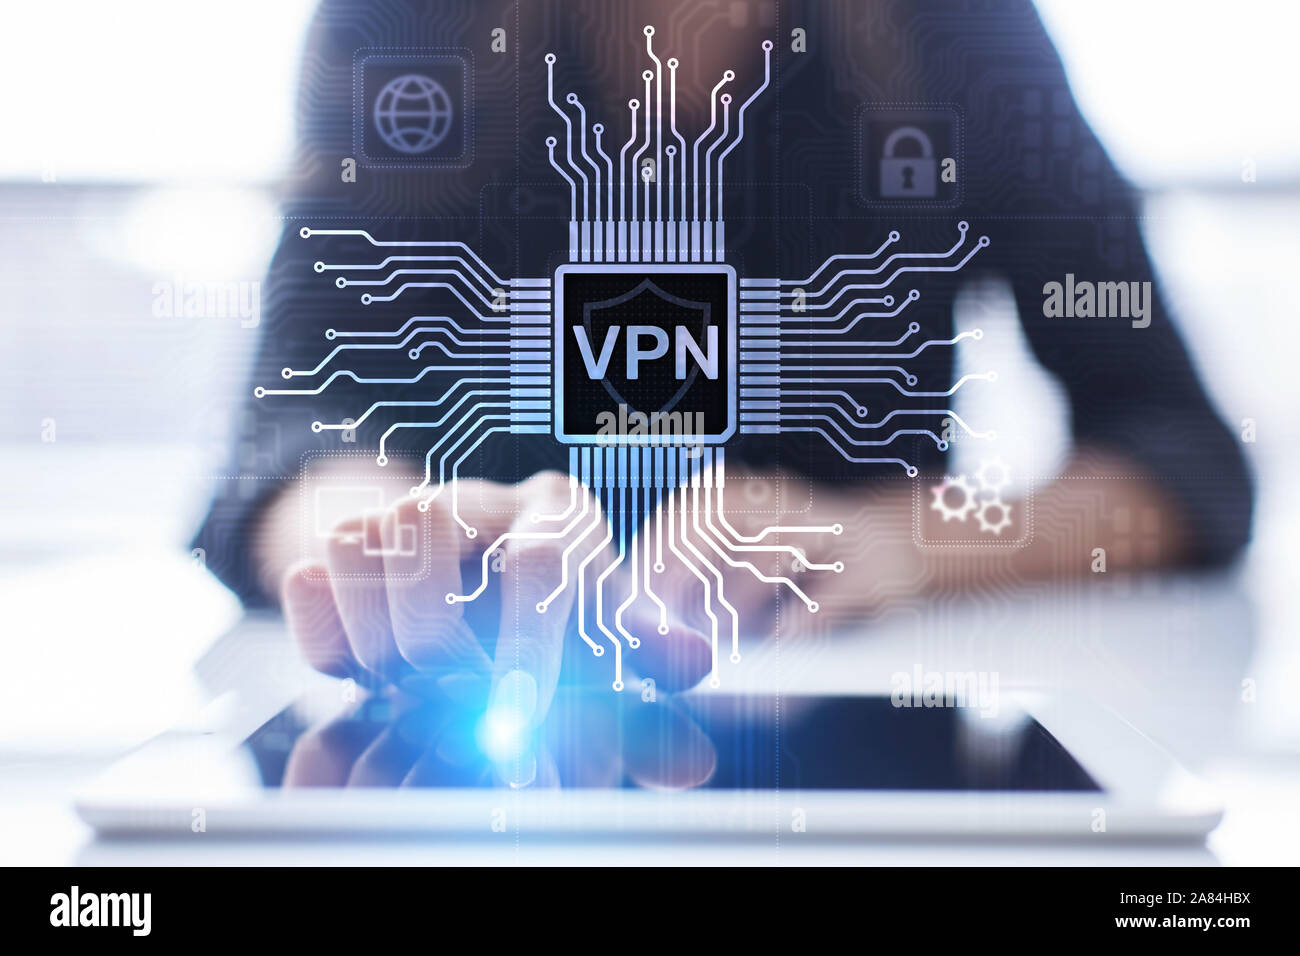 VPN virtual private network internet access security ssl proxy anonymizer technology concept button on virtual screen Stock Photo